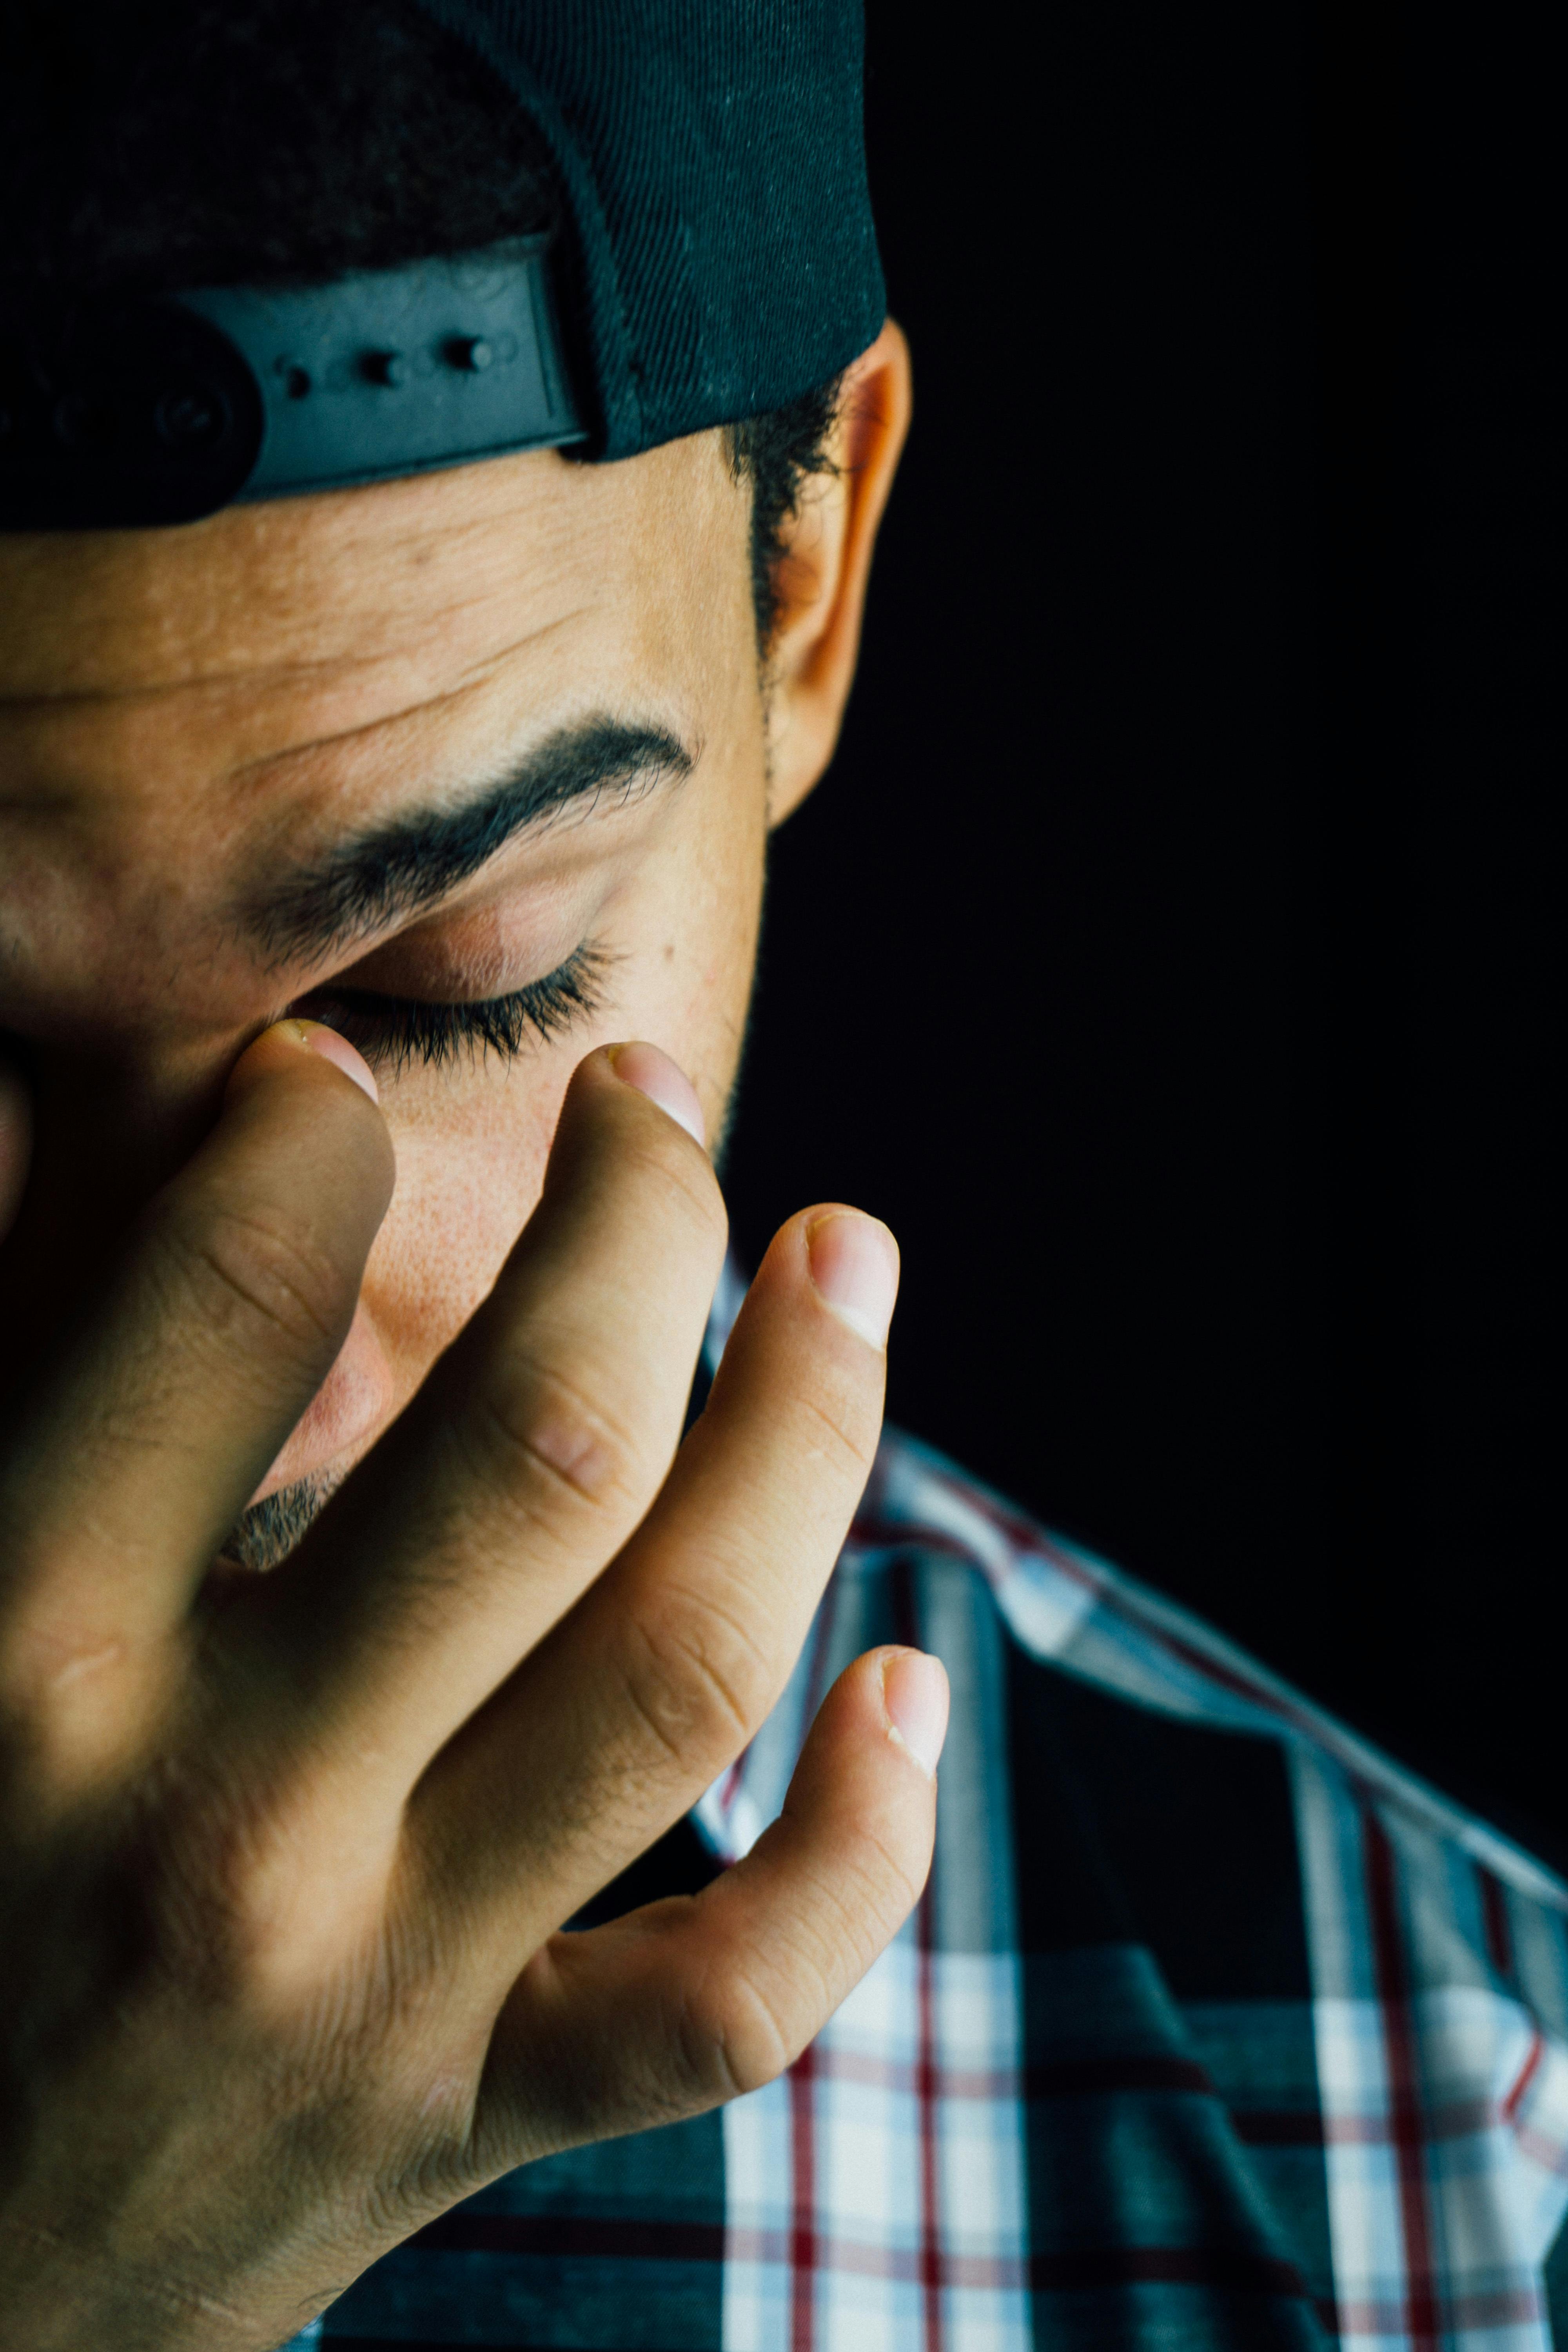 A frustrated man pinching the bridge of his nose | Source: Pexels